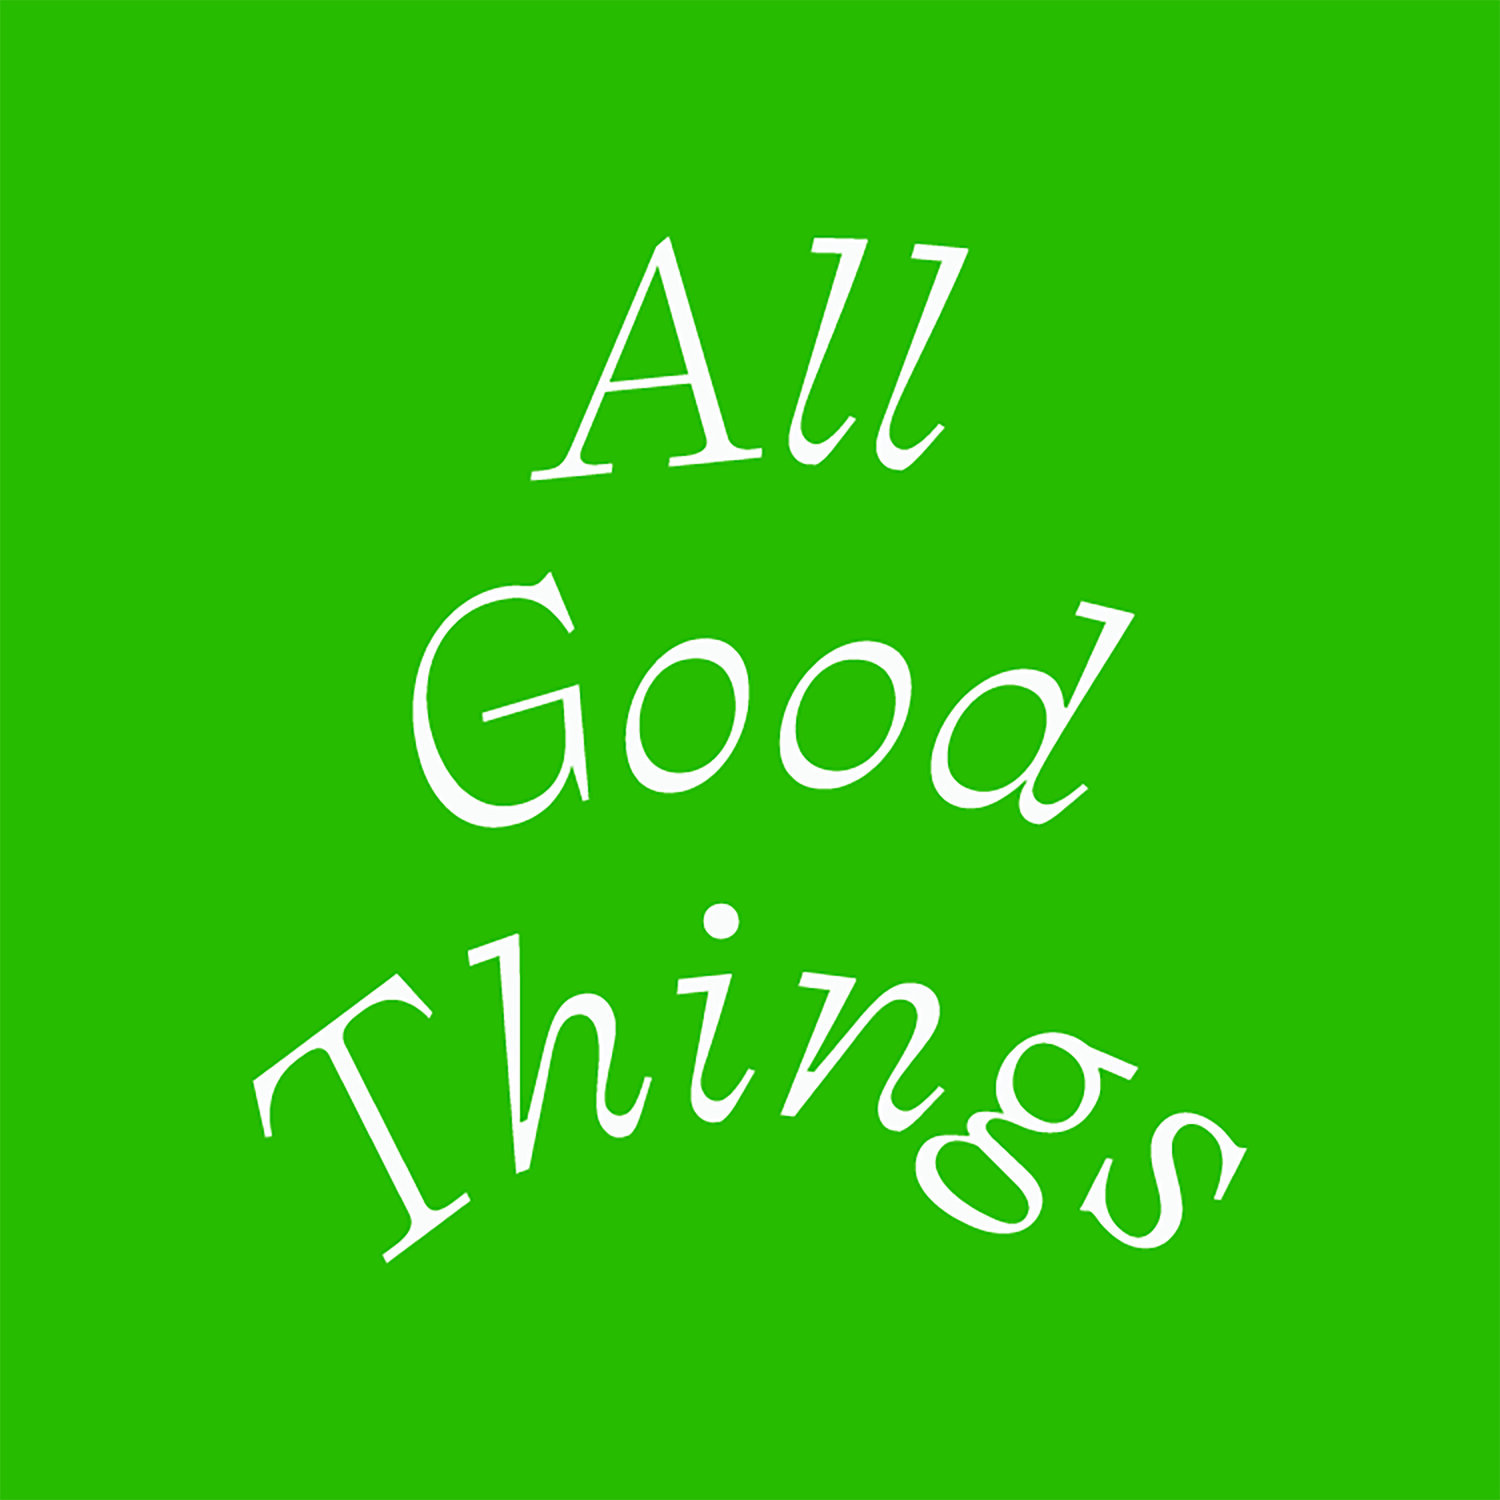 ALL GOOD THINGS